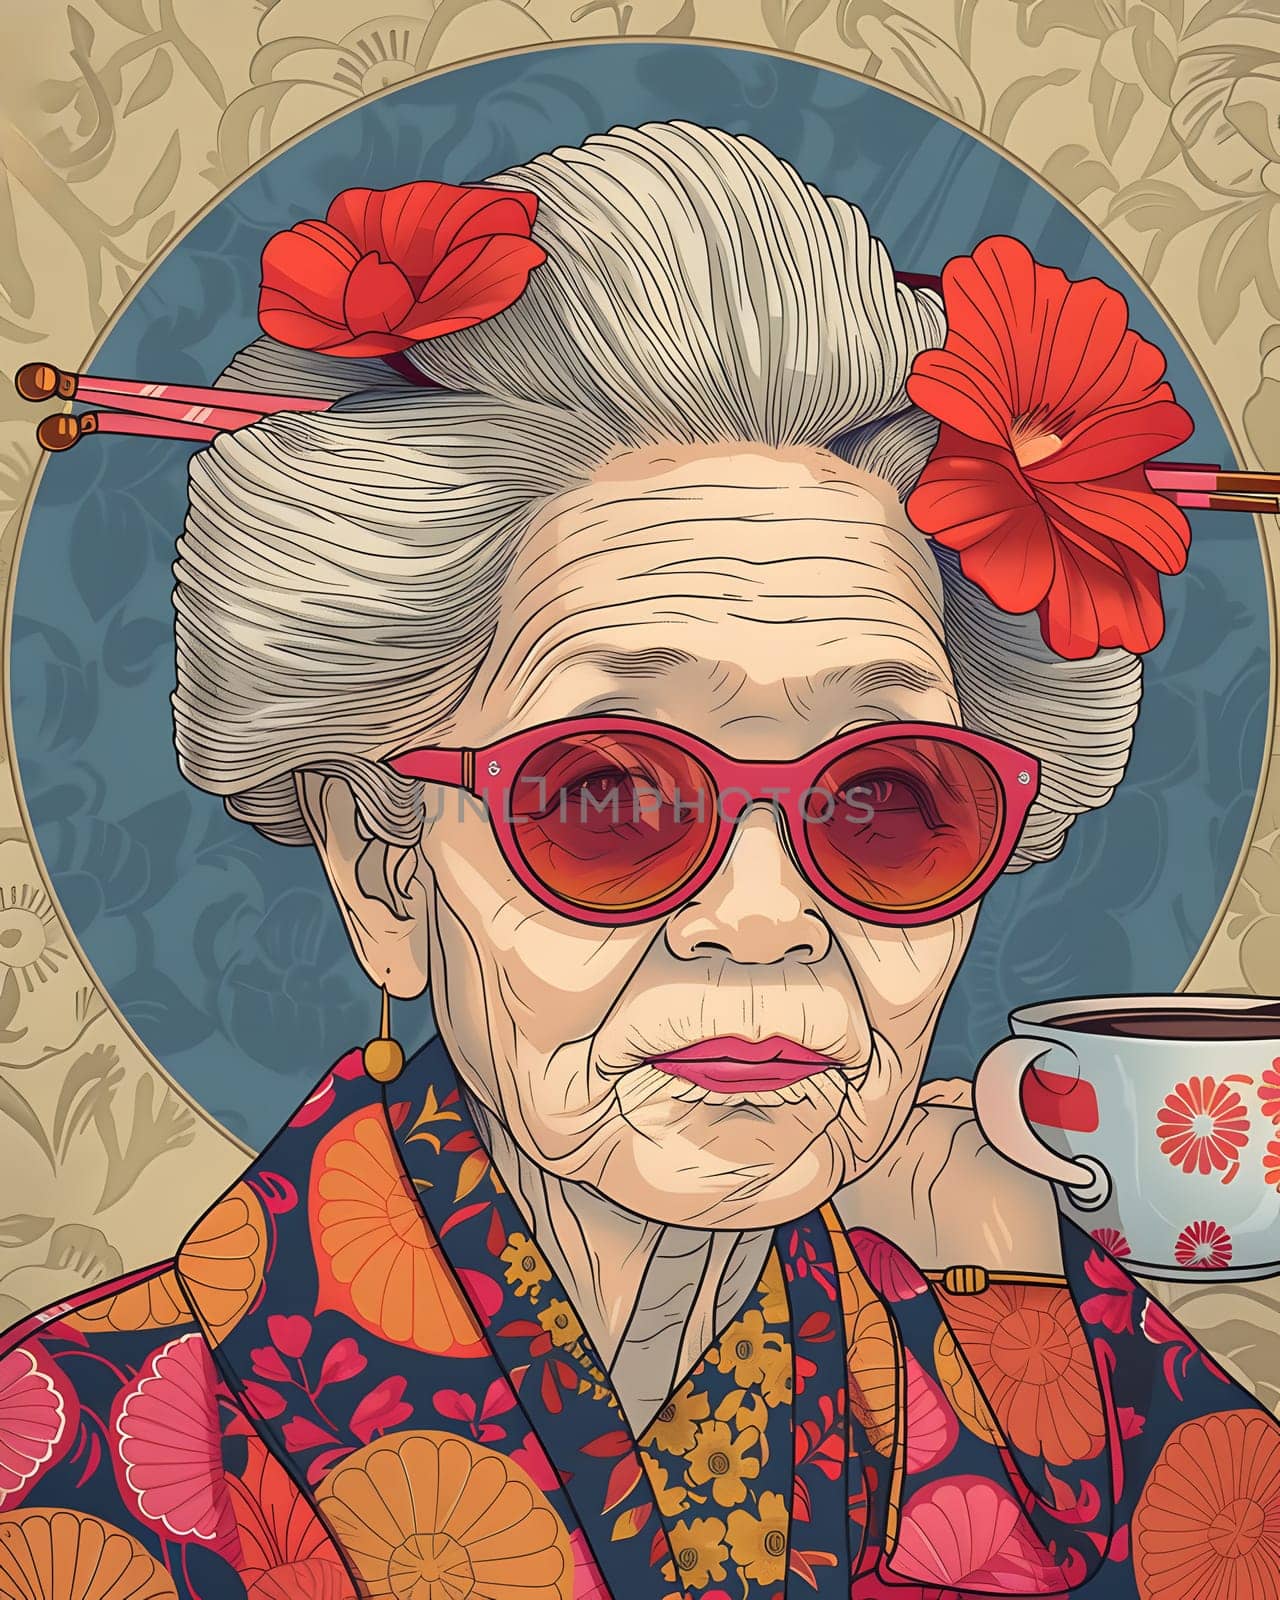 An elderly woman wearing sunglasses and a flower in her hair is holding a cup of coffee, showcasing a unique hairstyle and vision care